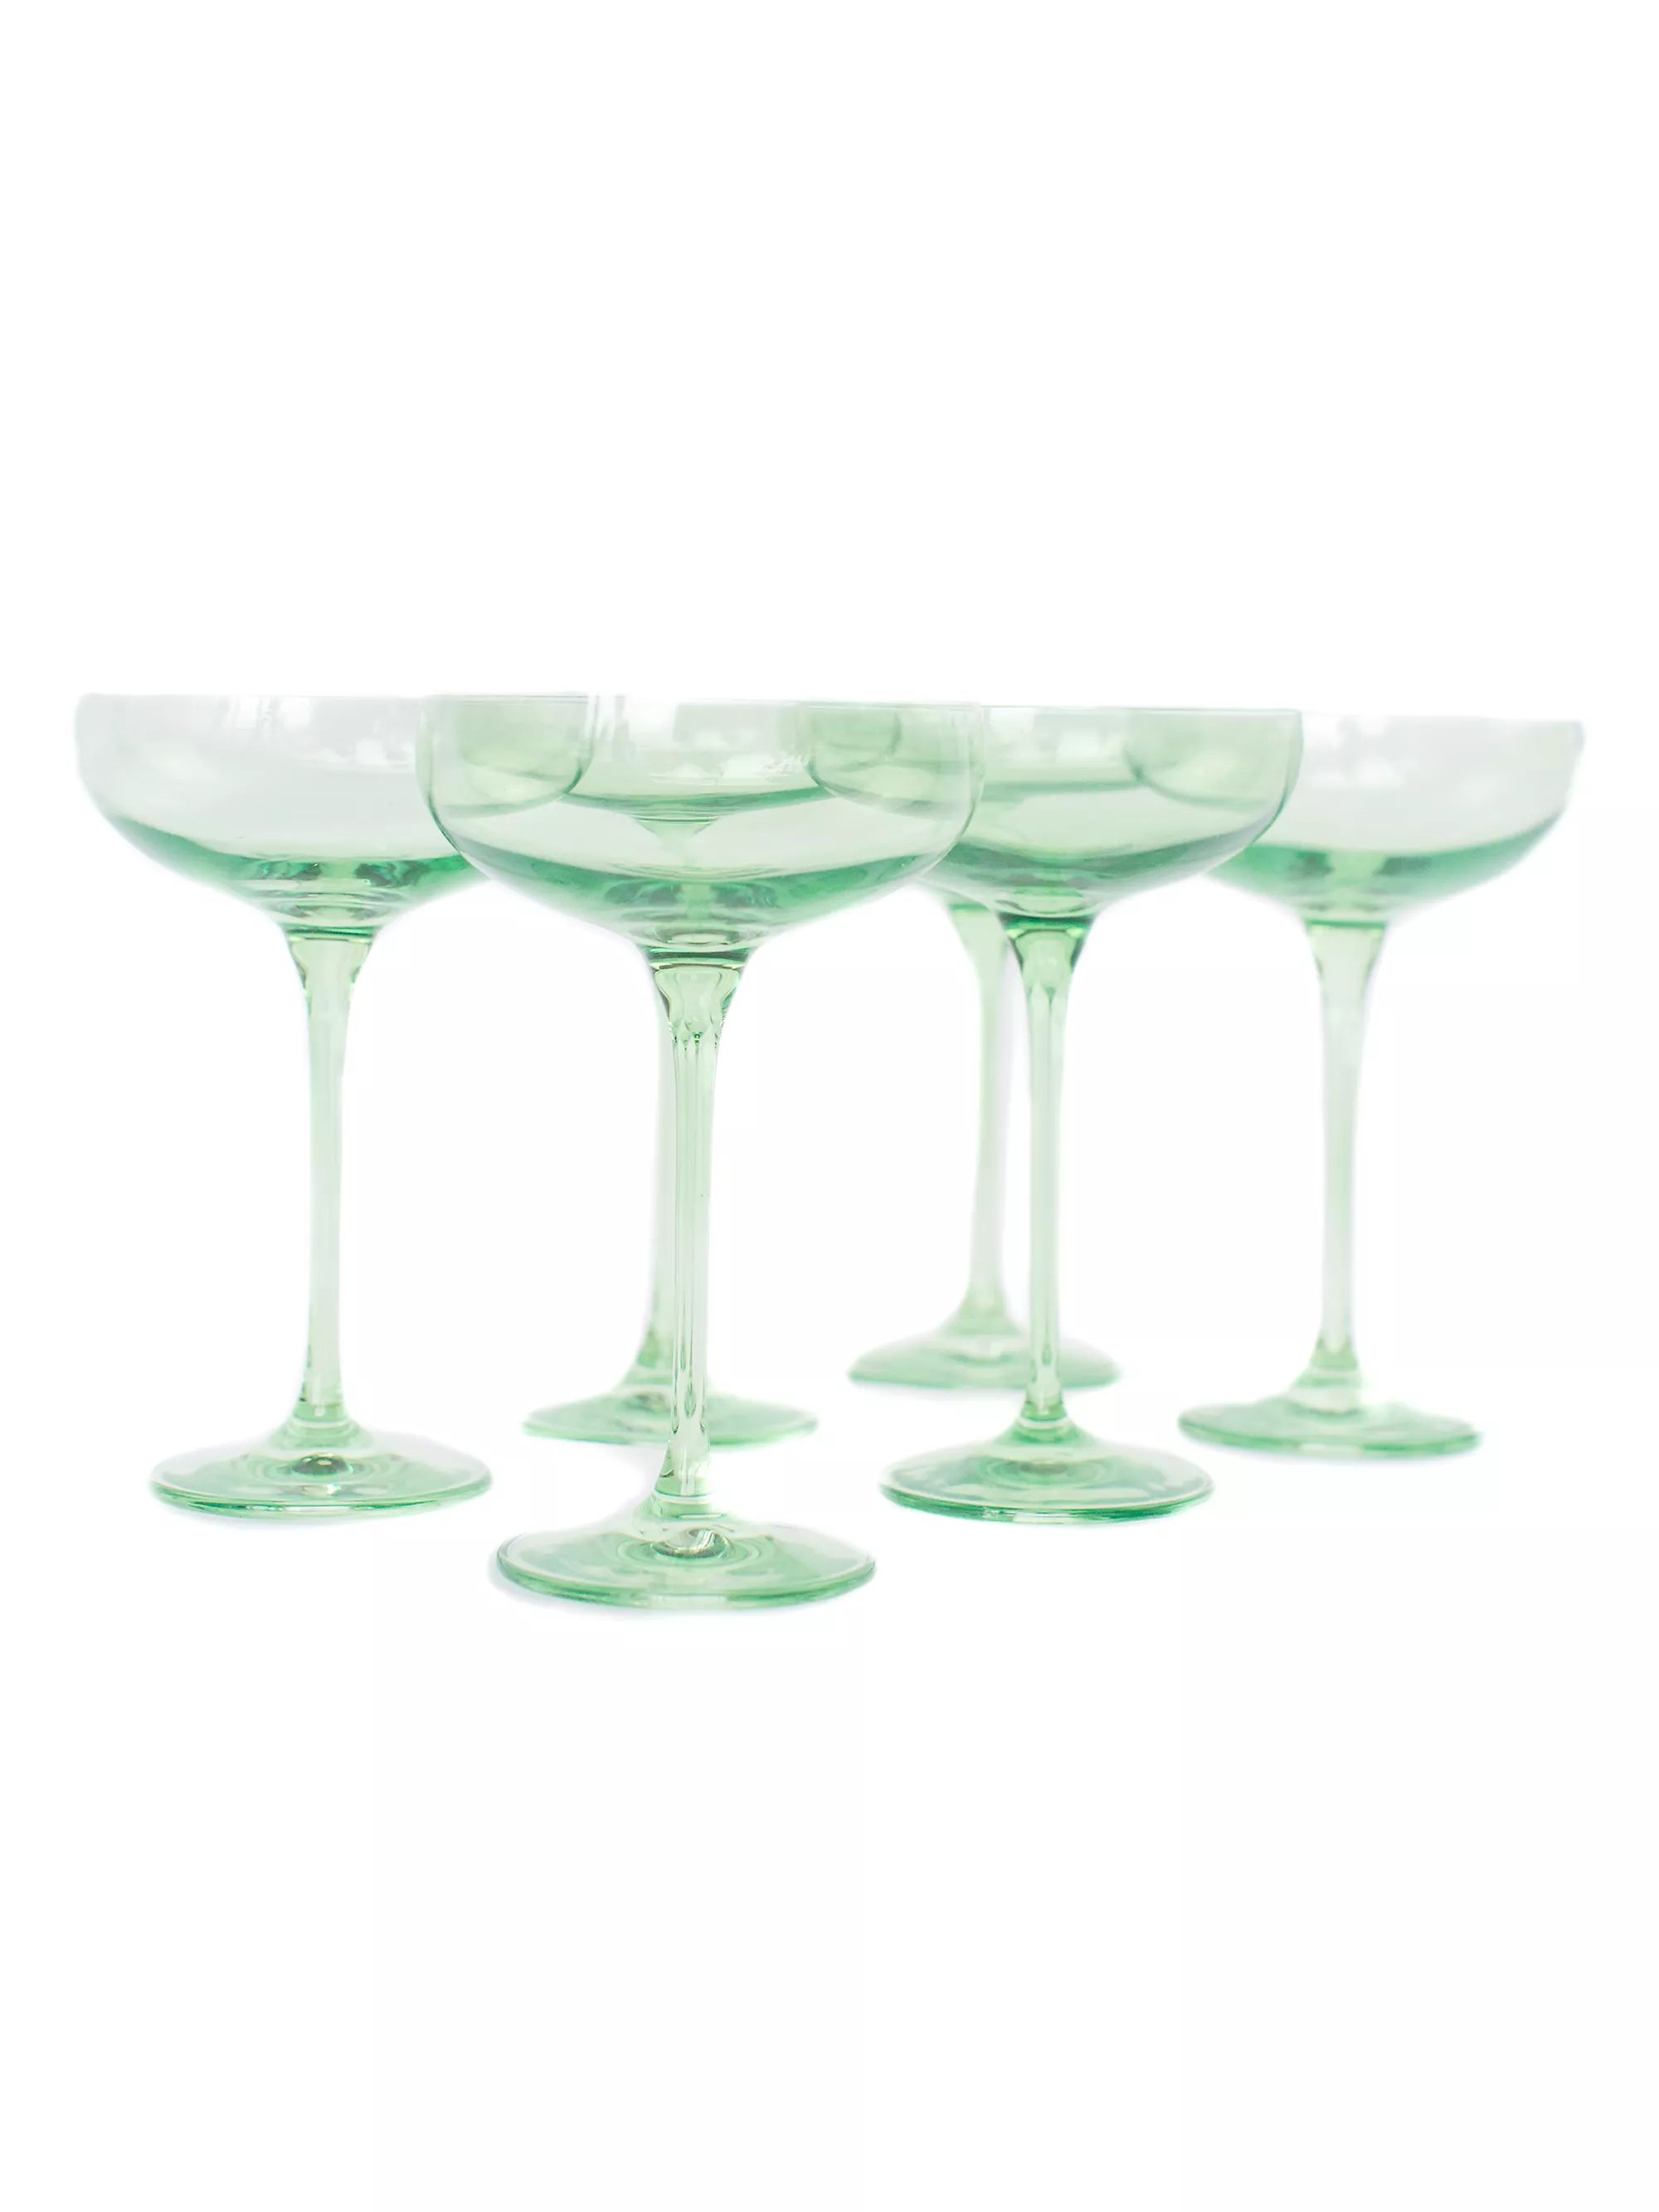 Tinted Champagne Coupes 6-Piece Set | Saks Fifth Avenue